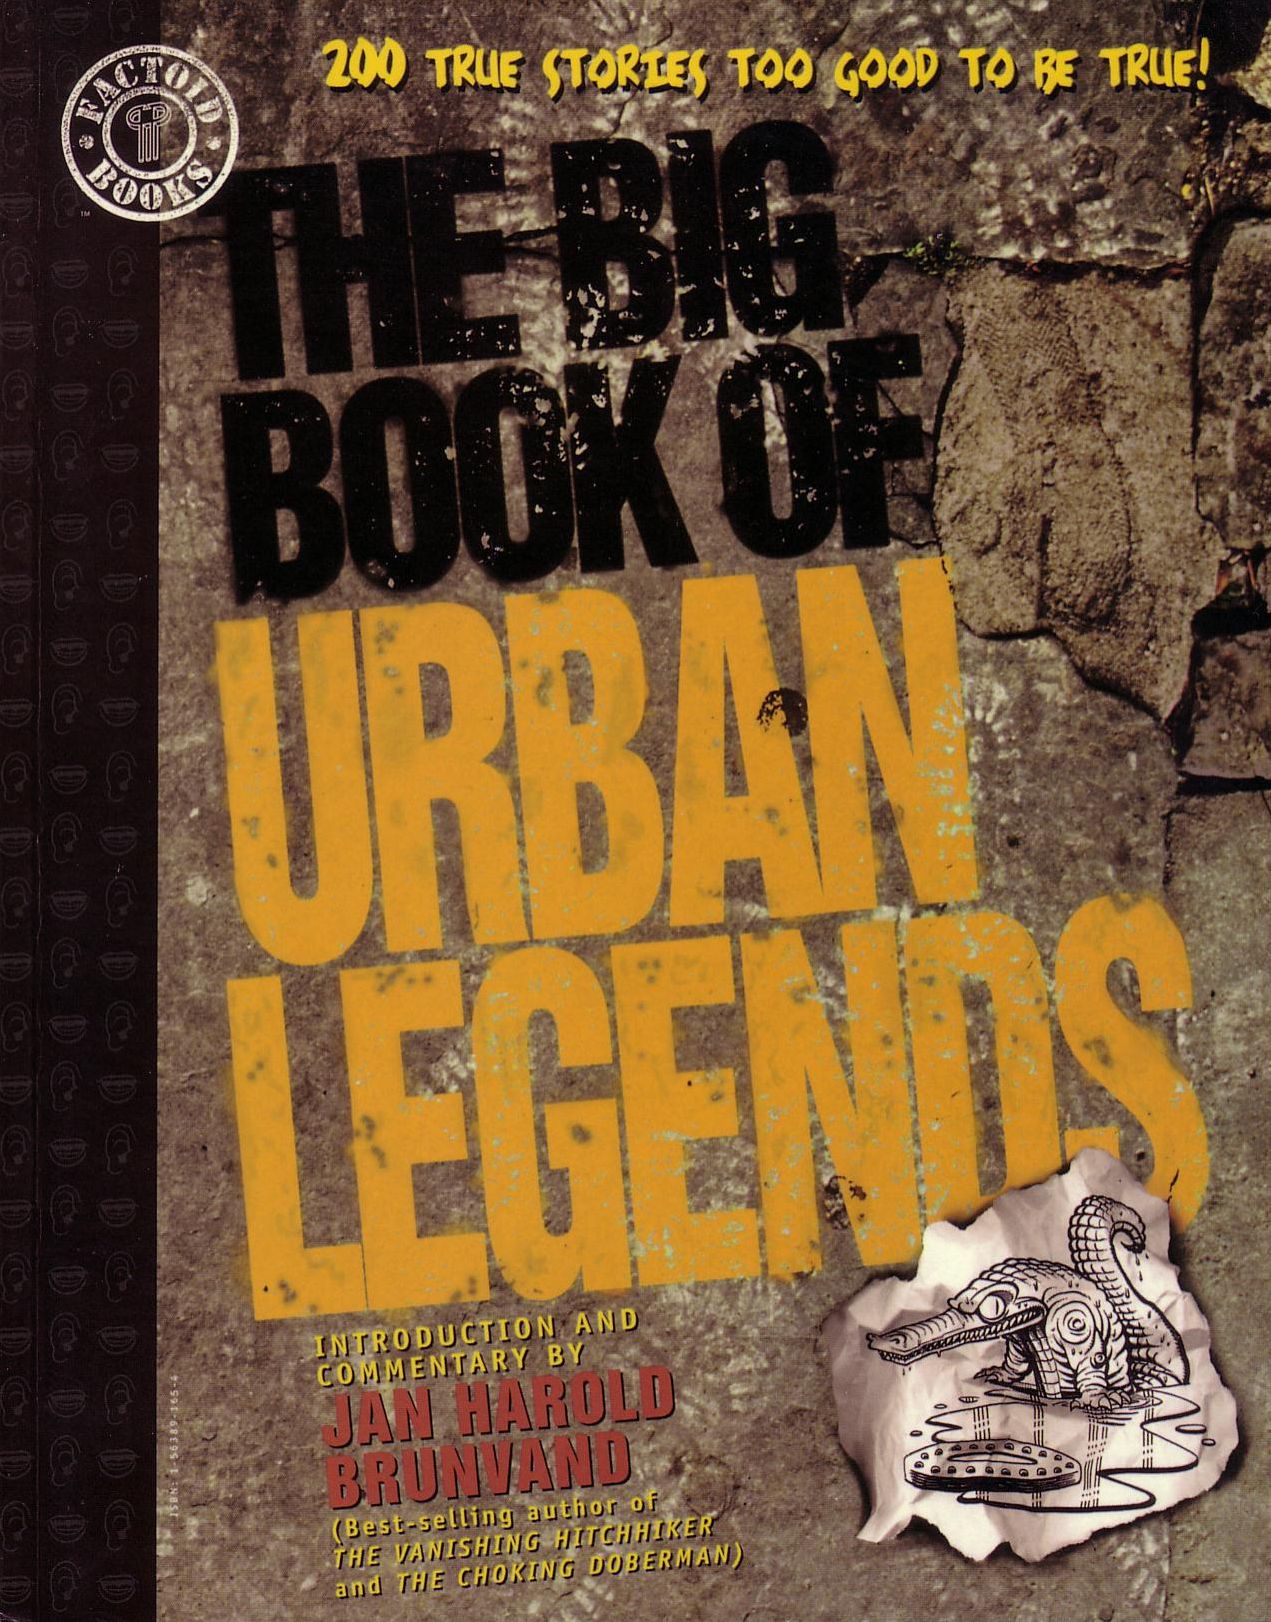 The Big Book of... TPB Urban Legends Page 1